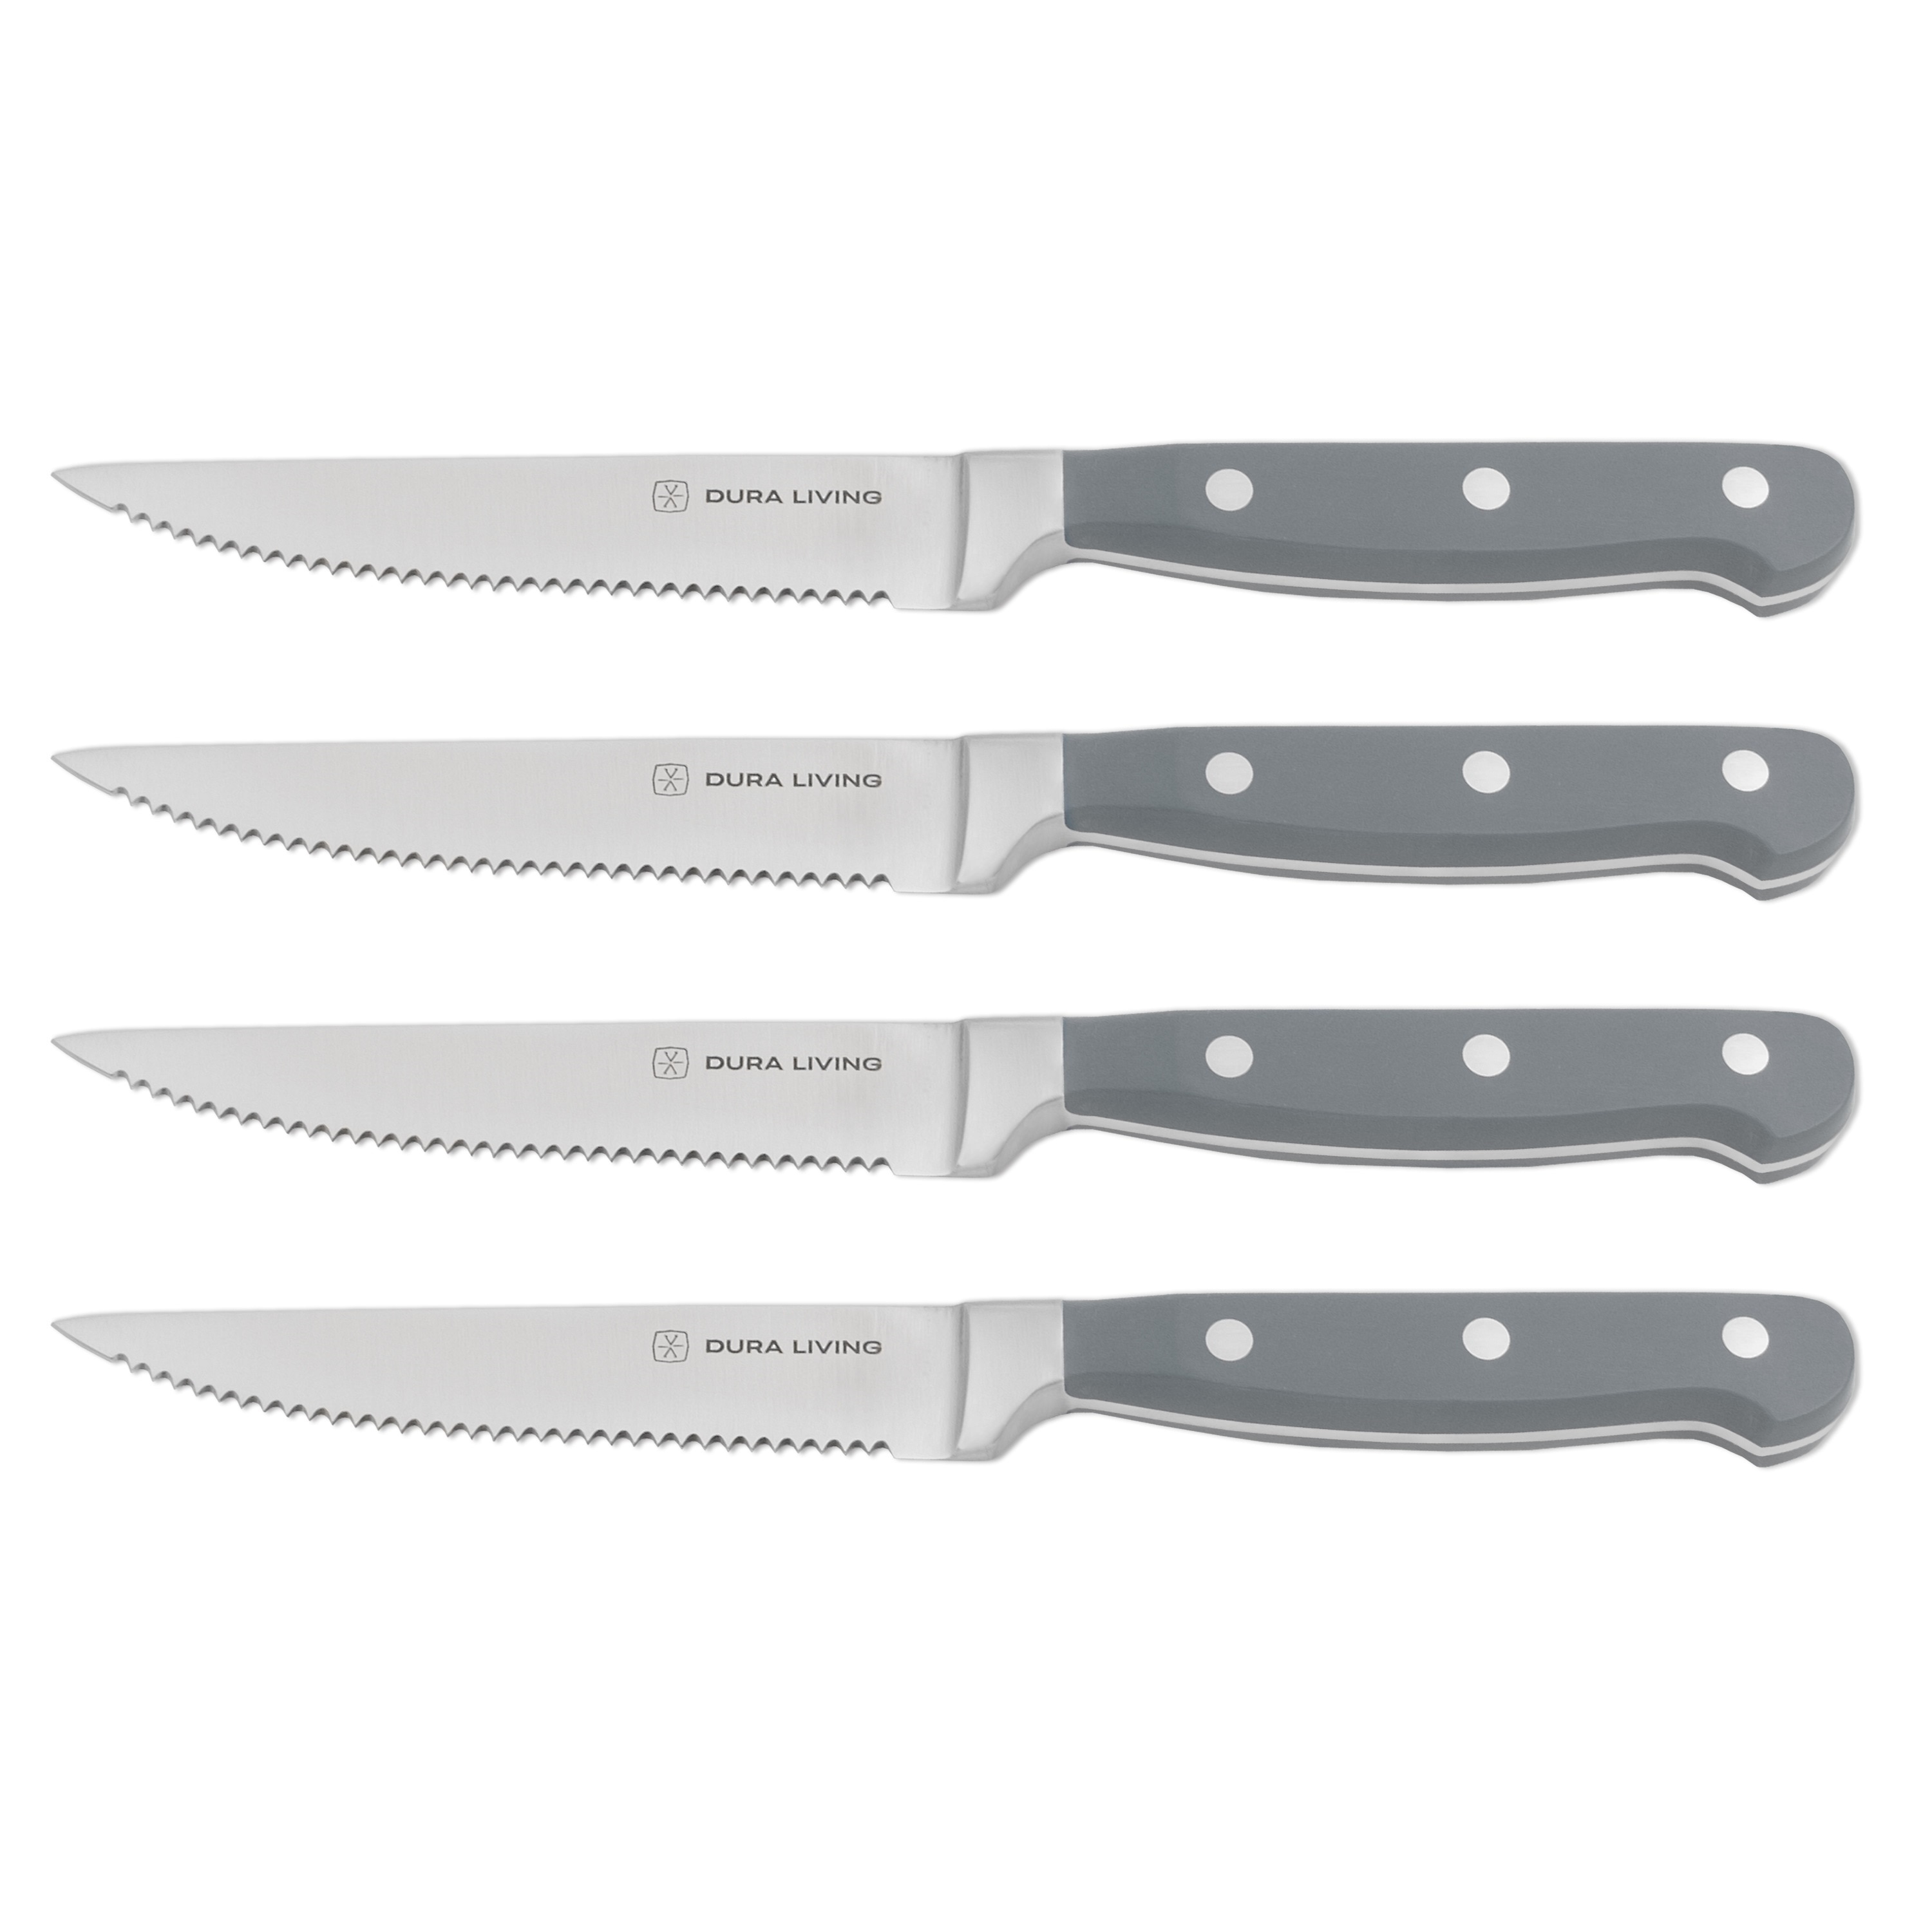 Dura Living Superior Steak Knife Set of 8 - Forged Stainless Steel Serrated Blades, Gray - Grey